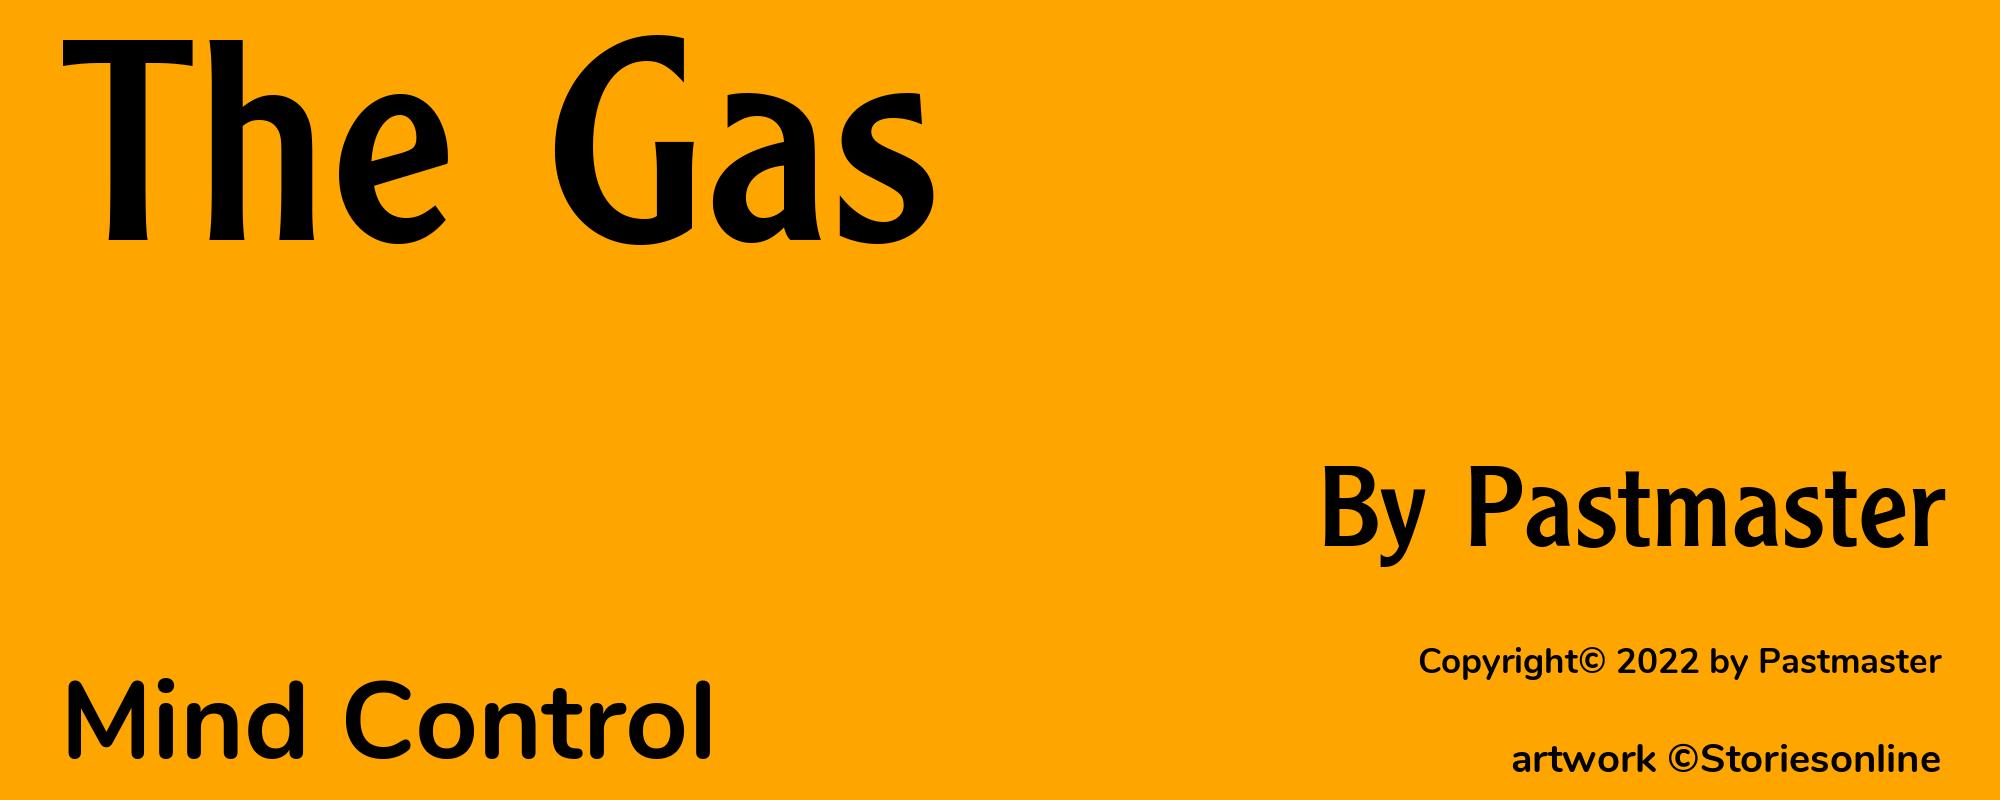 The Gas - Cover